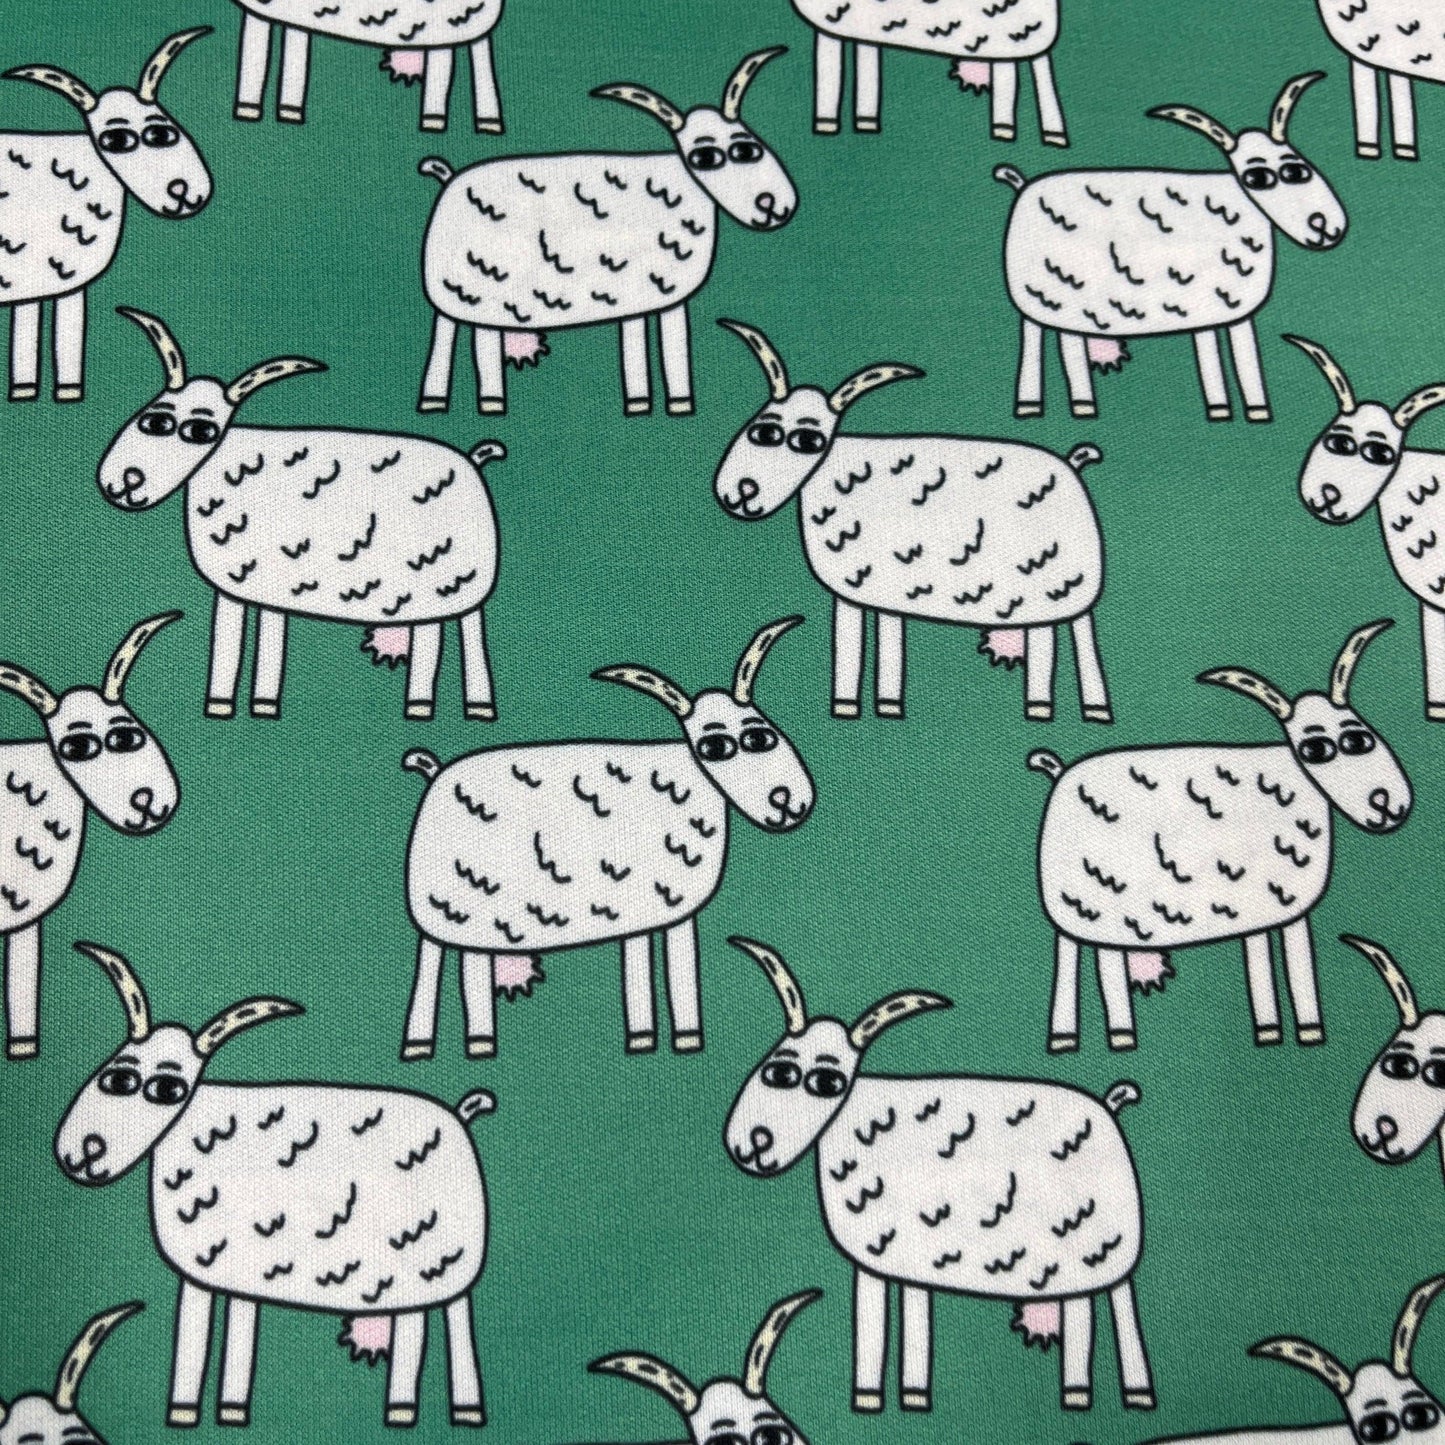 Goats on Green 1 mil PUL Fabric- Made in the USA - Nature's Fabrics